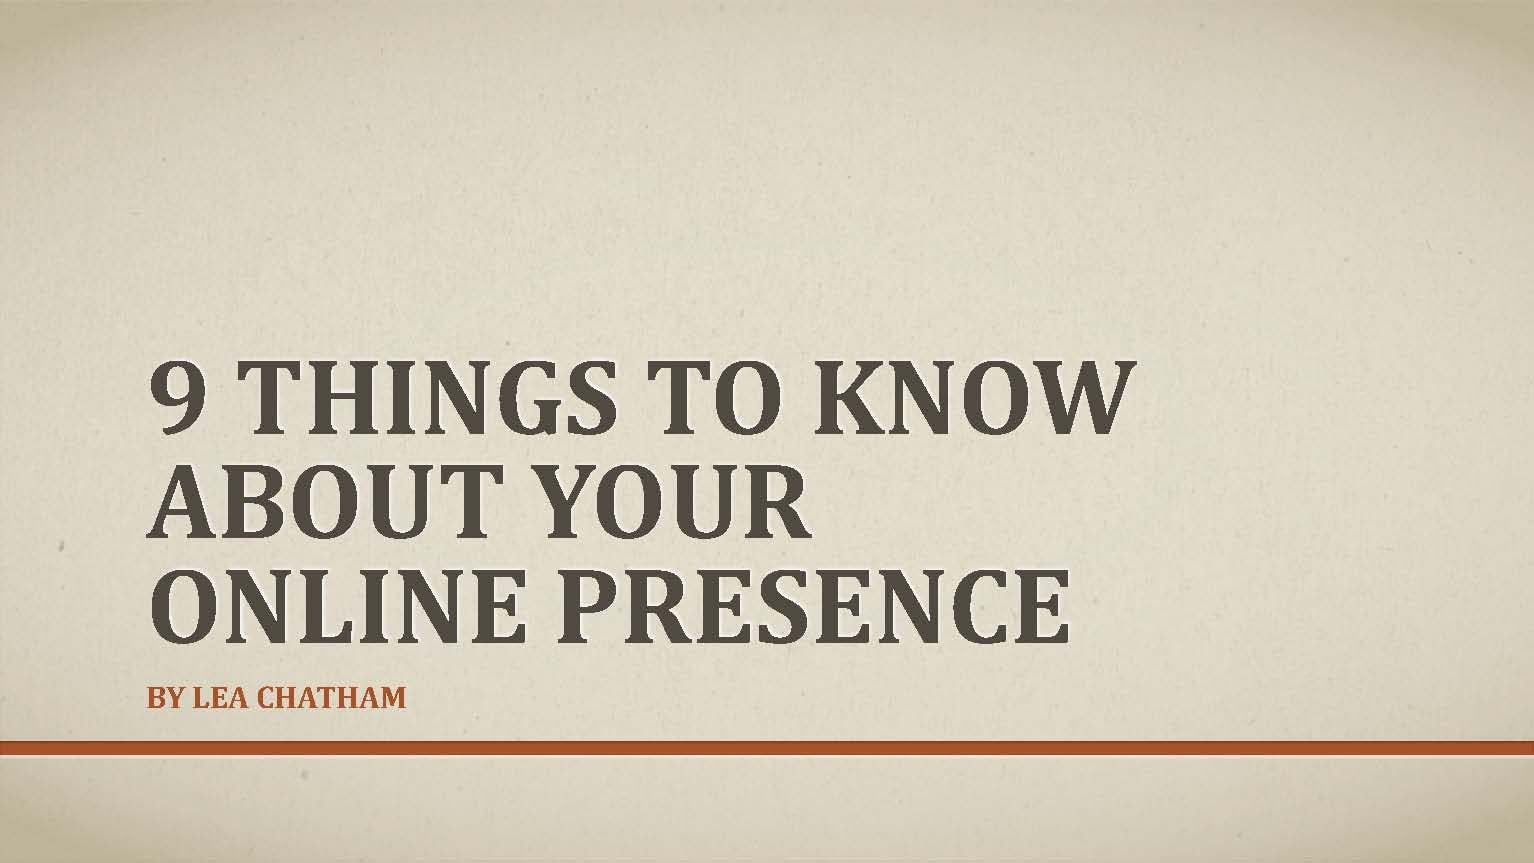 9 Things to Know about Your Online Presence